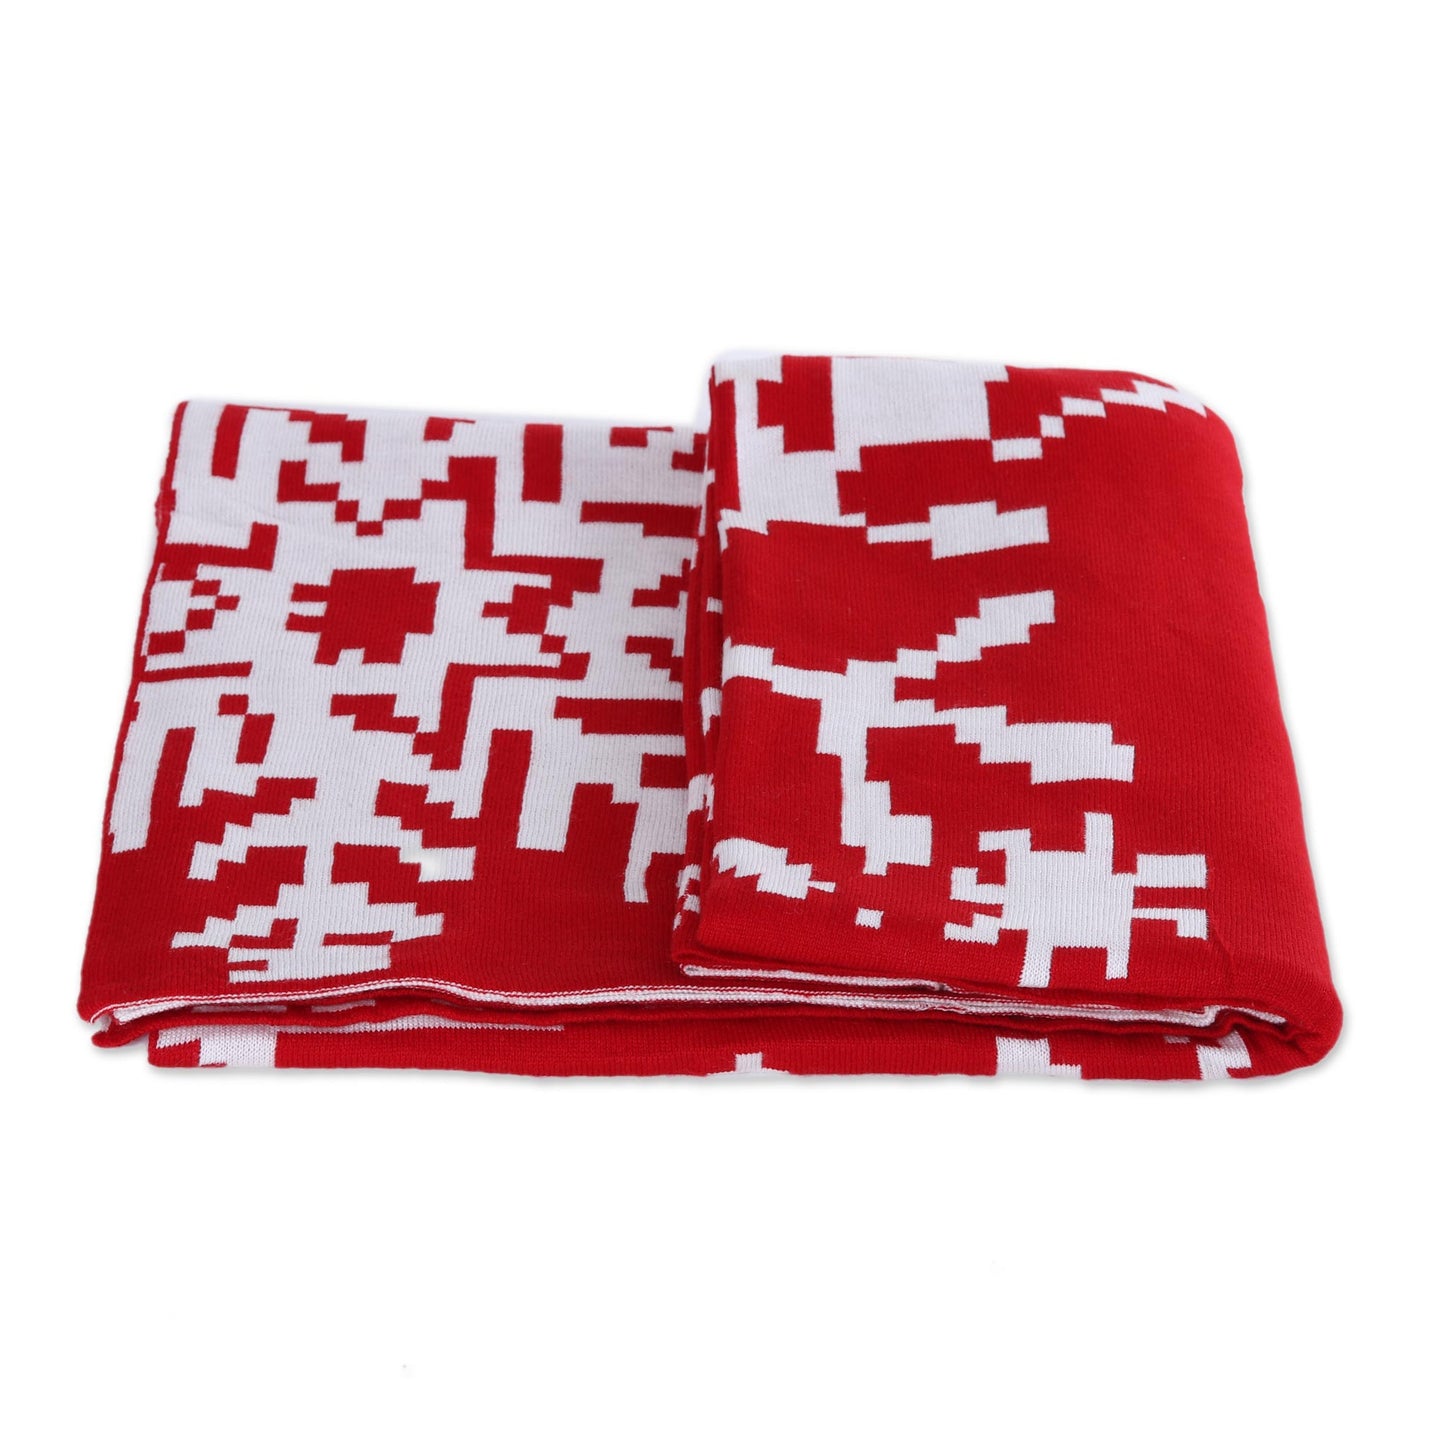 Christmas Fantasy in Poppy Christmas-Themed Knit Throw in Poppy from India